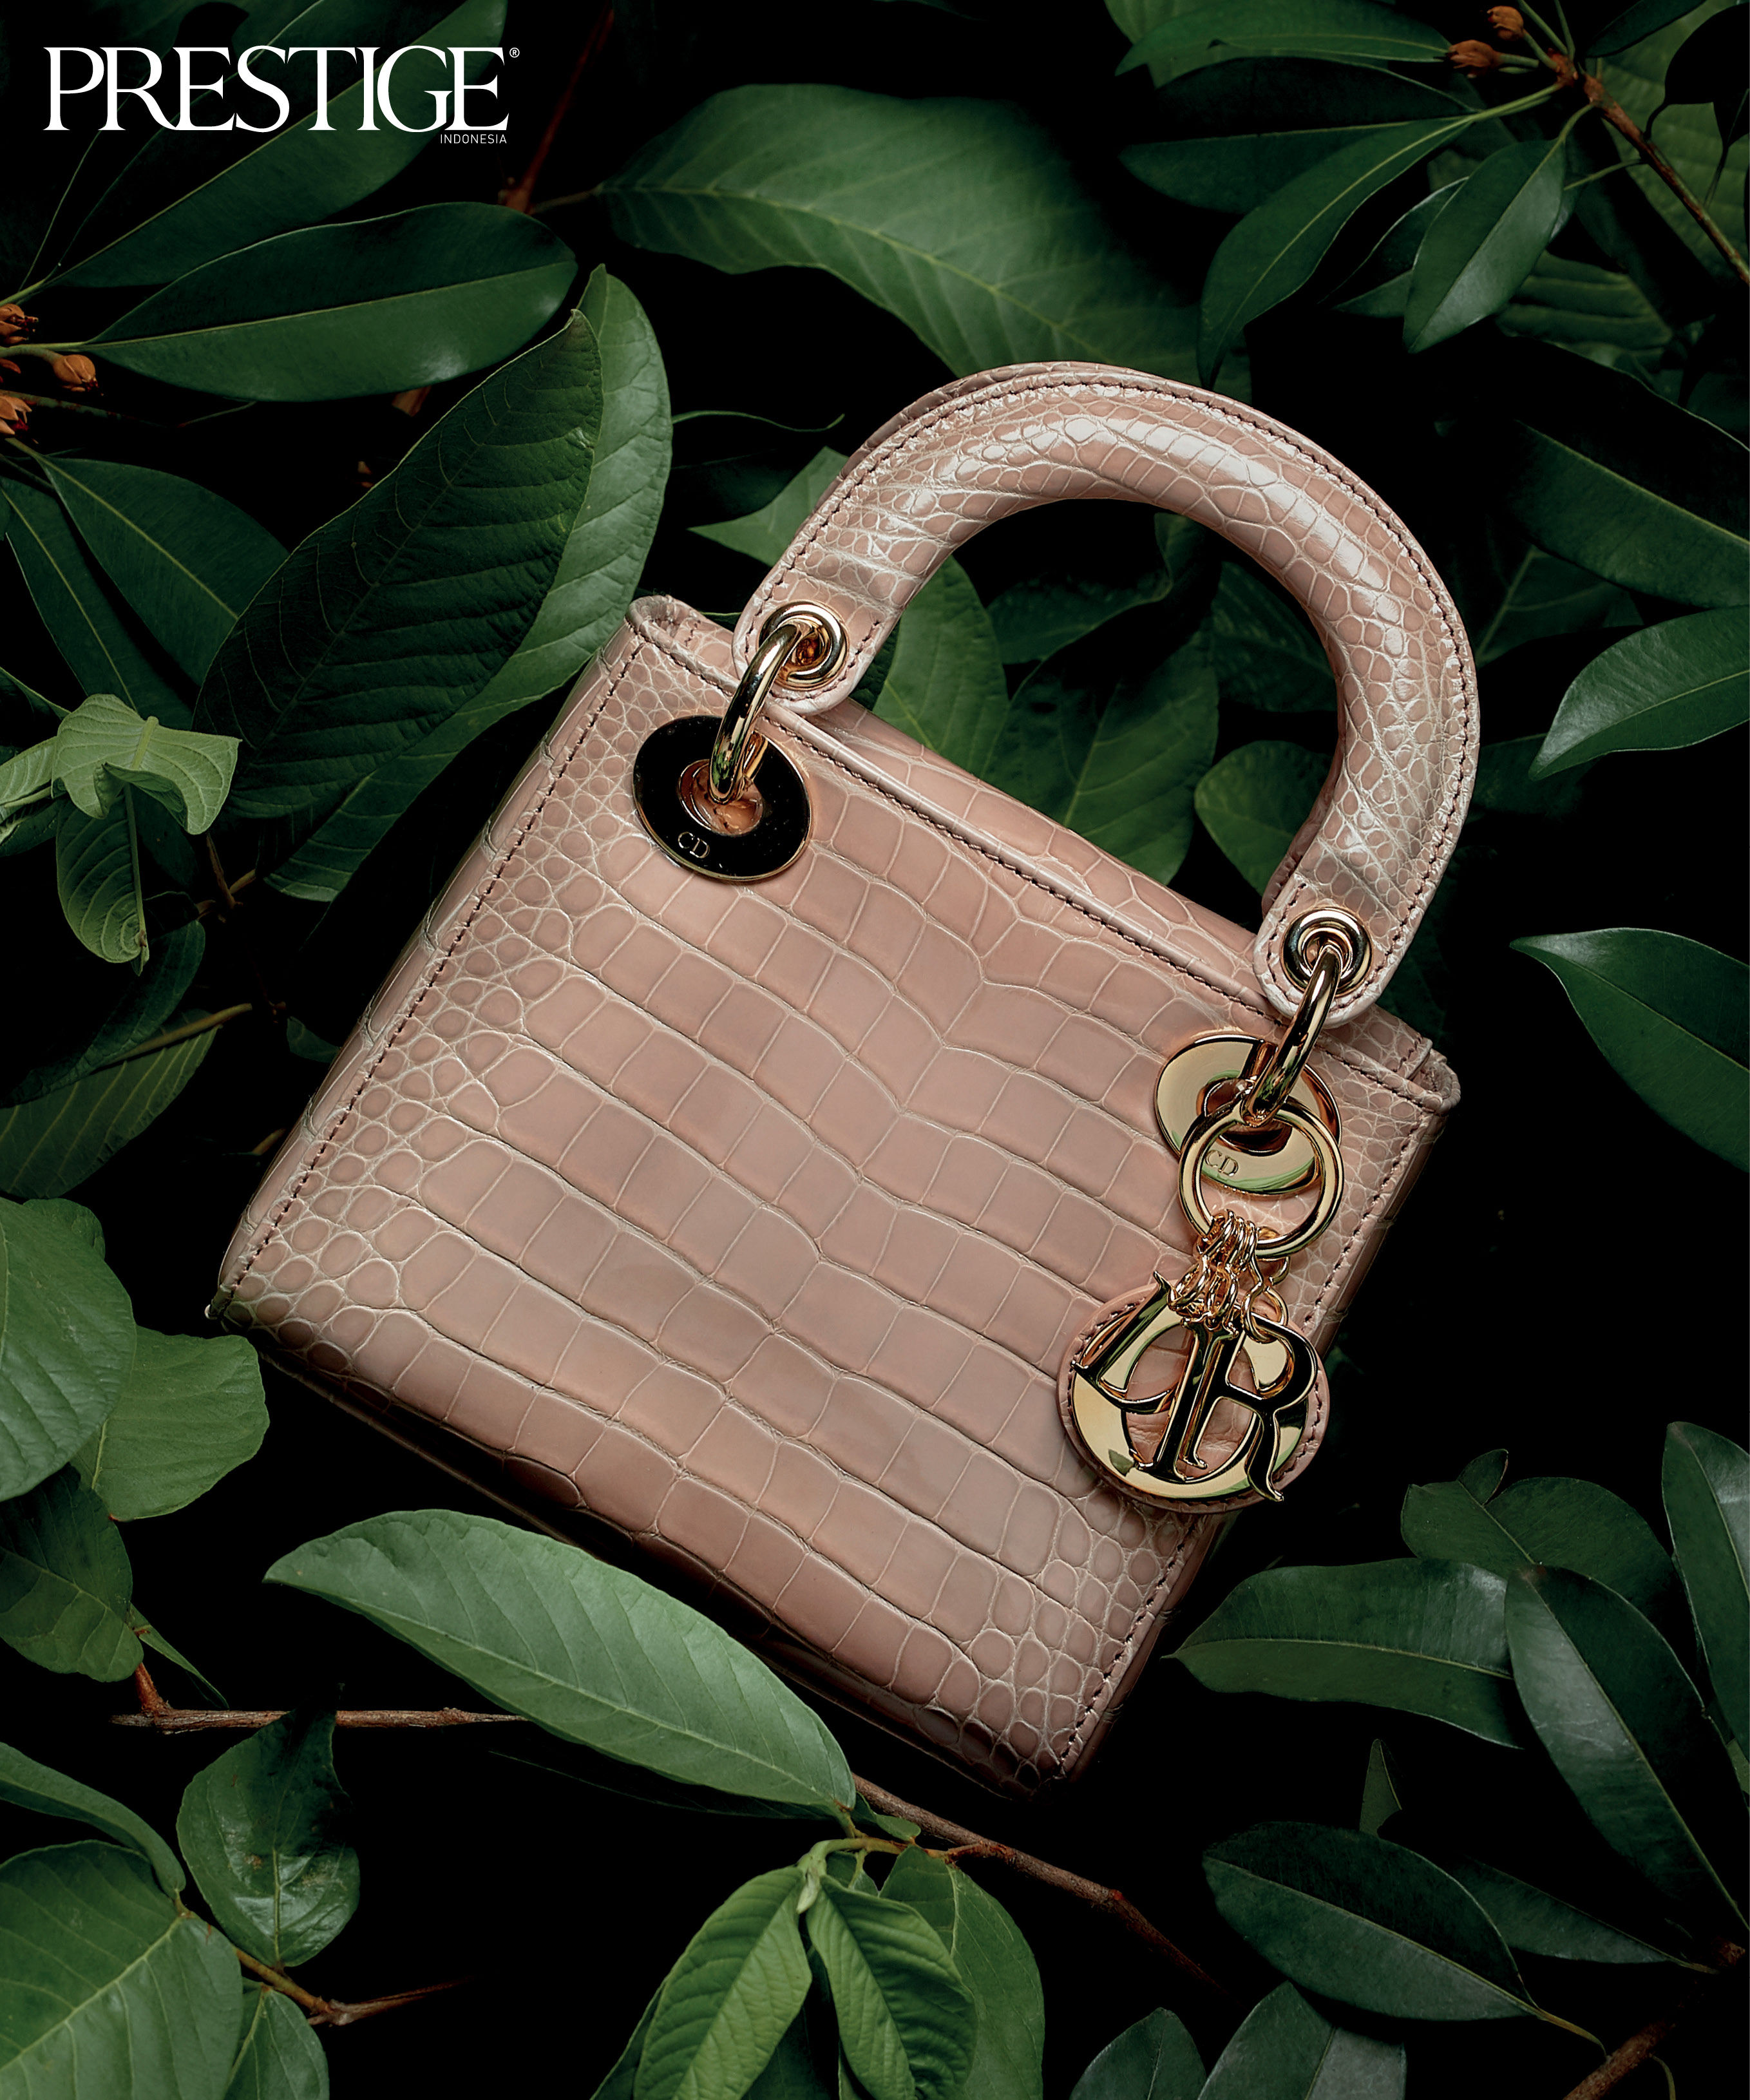 The Best Lady Dior Bags in Exotic Skin